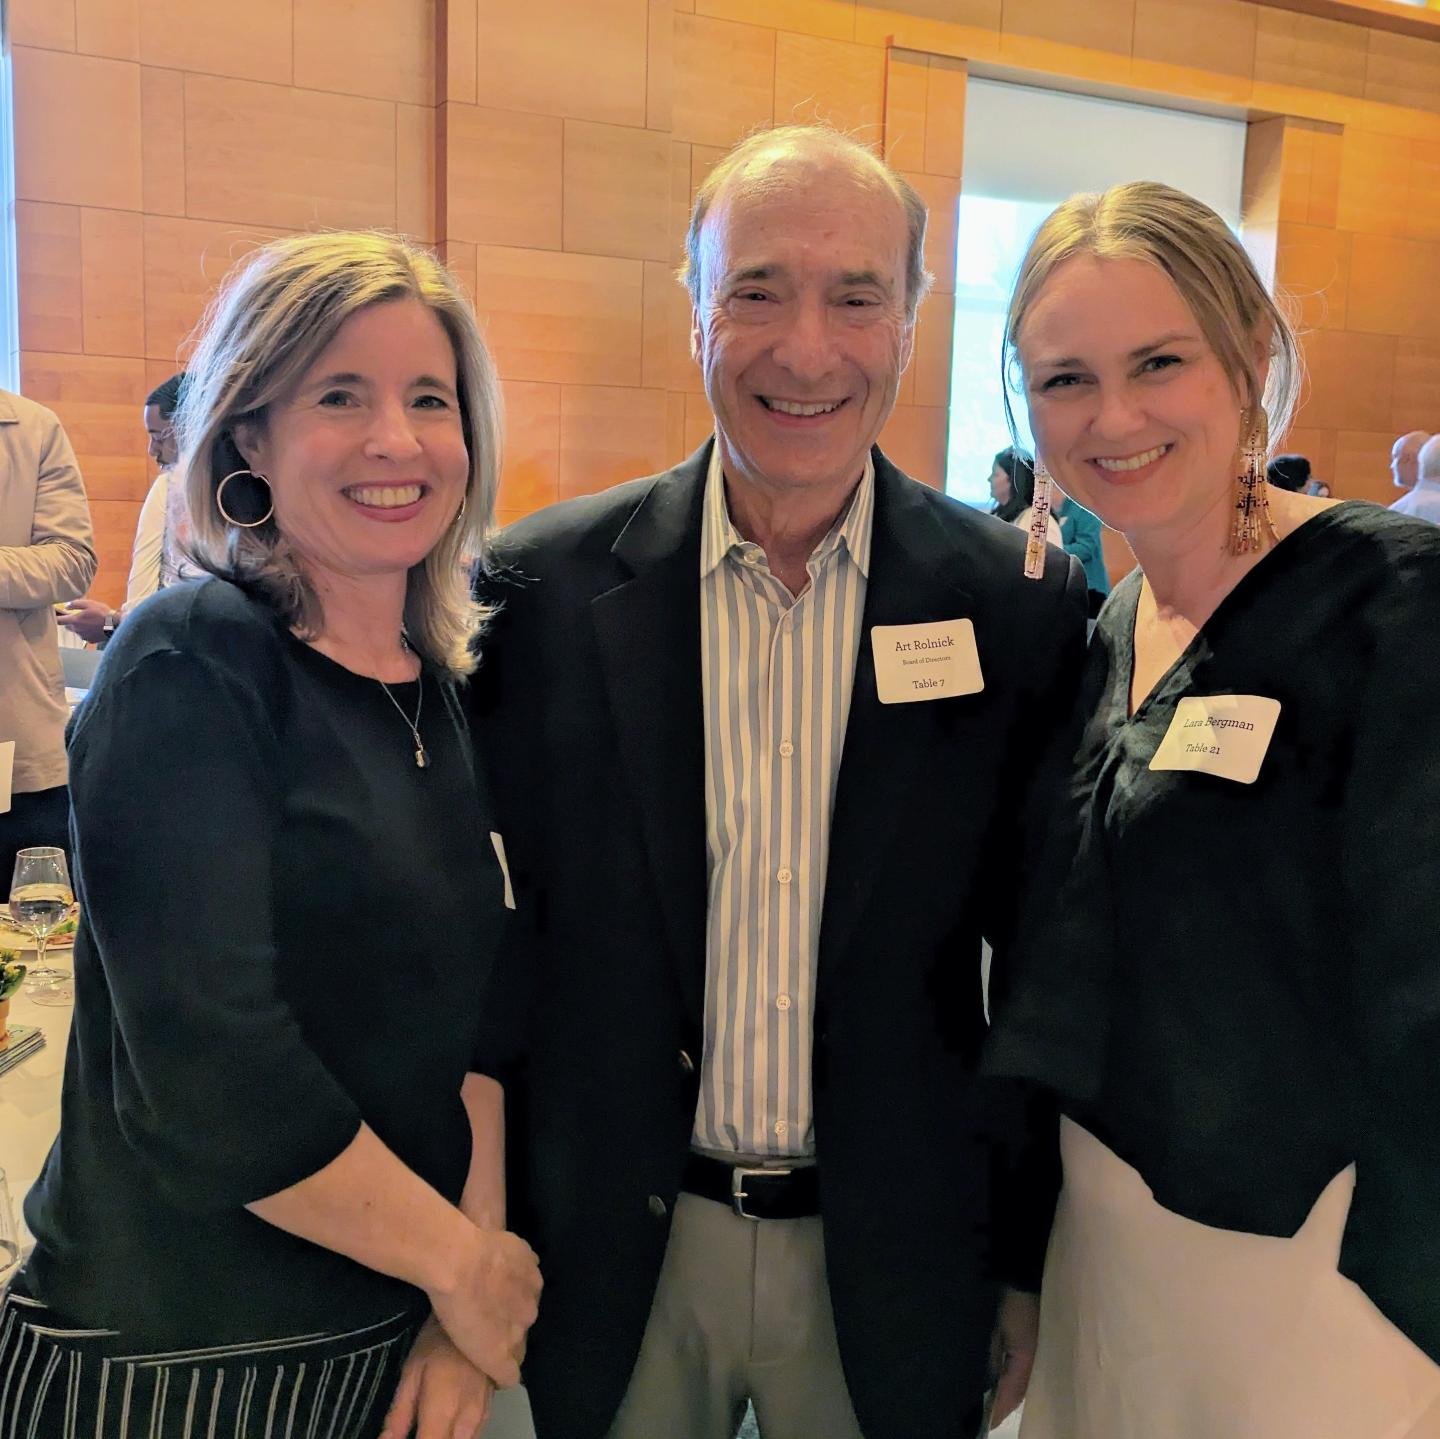 Honored to spend the afternoon with Emily Hanford and Art Rolnick at the @mplswaytogrow luncheon today. Art Rolnick is the former Federal Reserve economist that has written extensively about the 18% return on investment we get when investing in high 